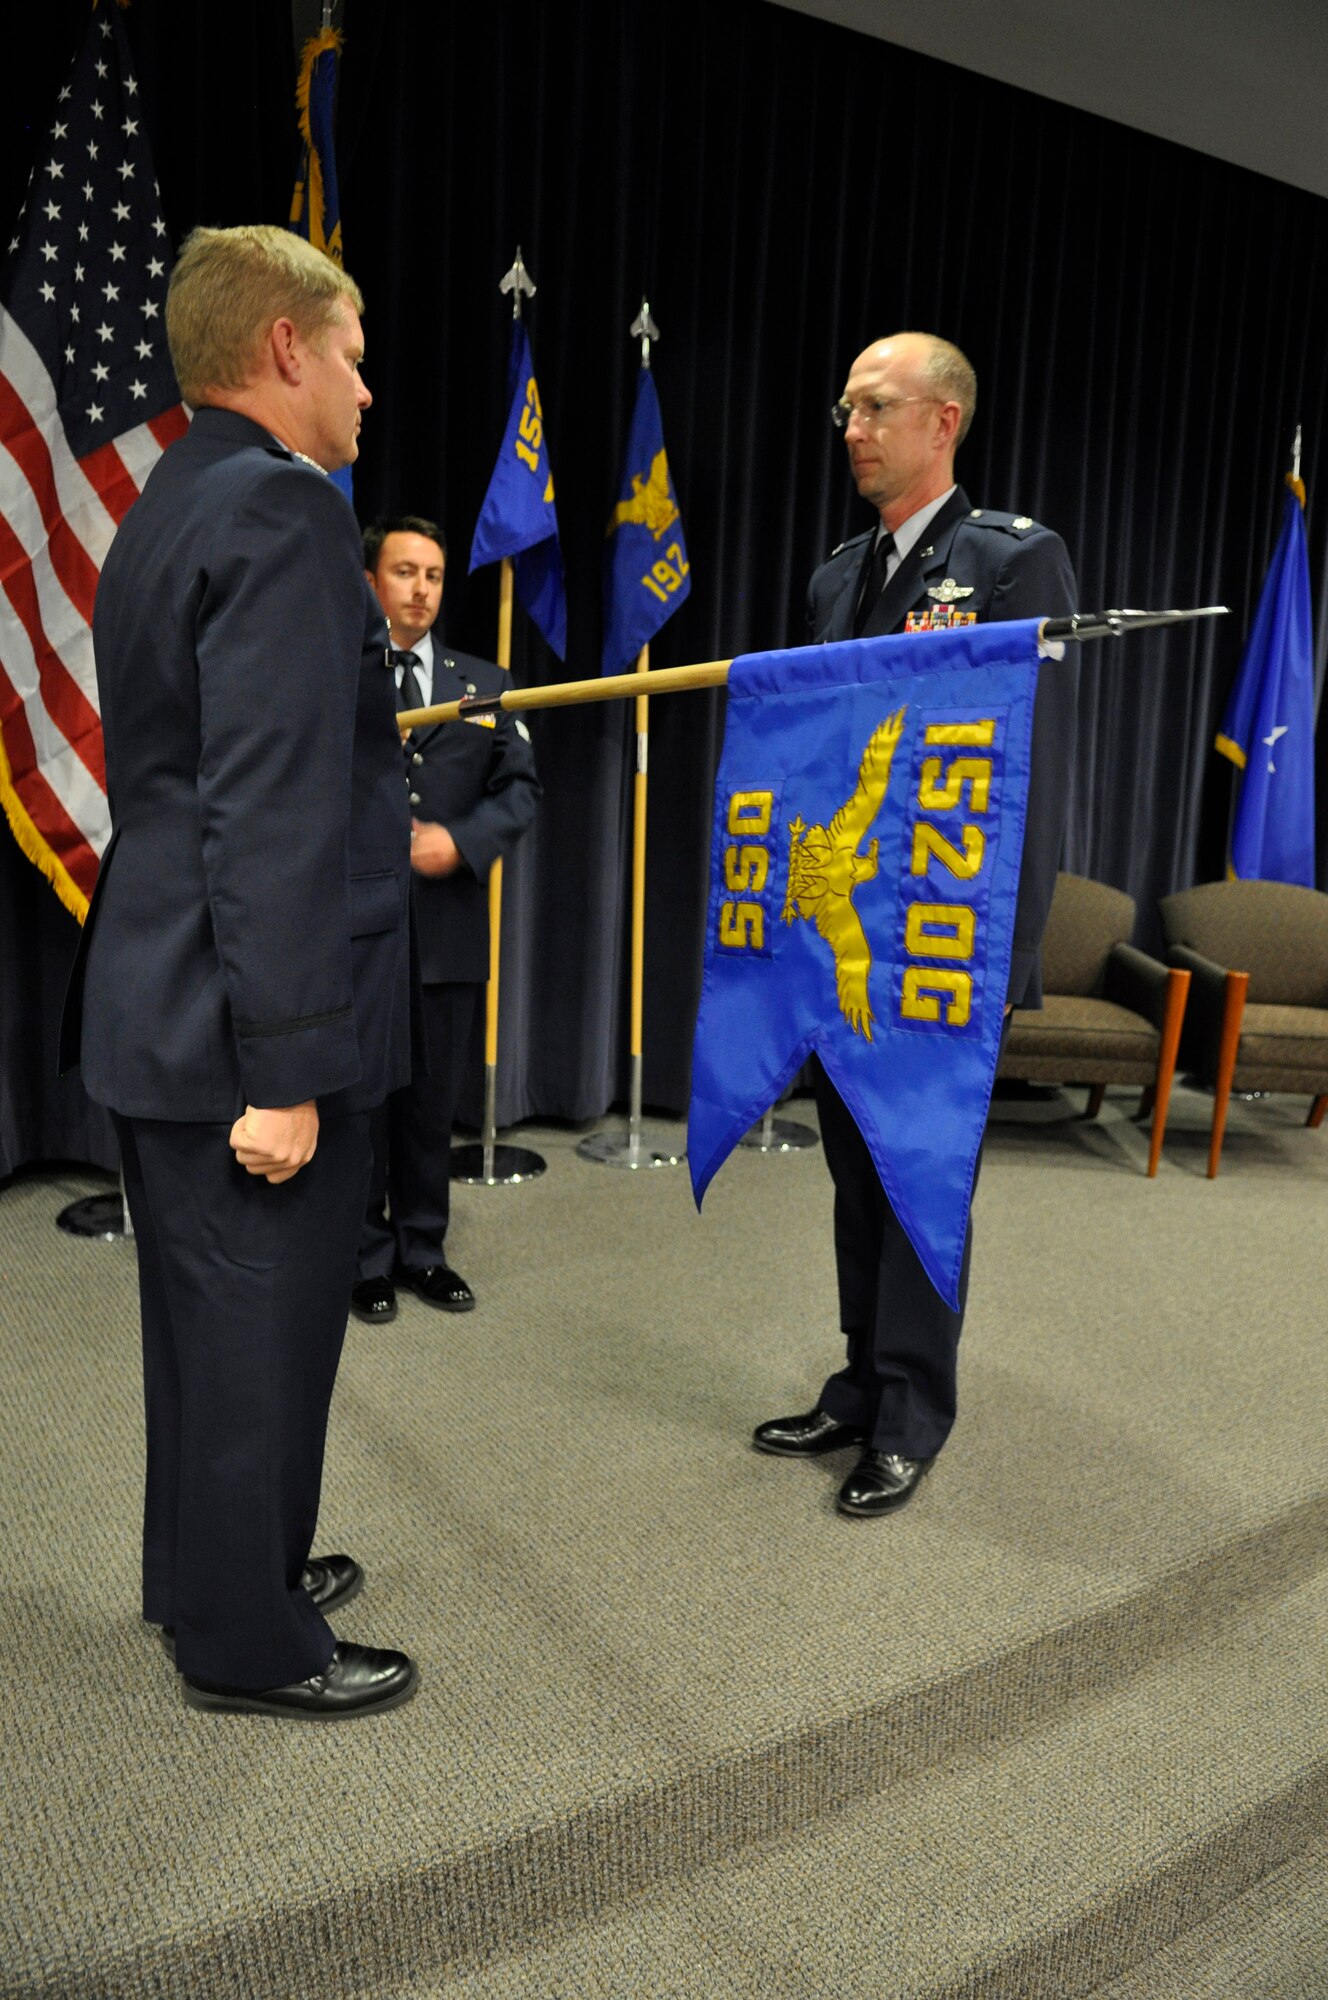 152nd Operation’s Group Command, Col. Kyle Reid (left) presents the guidon to incoming commander of the new 152nd Operation Support Squadron (OSS), Lt. Col. Jon Schulstad. The unit went live November 2 during an unveiling ceremony at the Nevada Air National Guard base in Reno, Nevada. The unit’s role will be to provide the members of the 152nd Operations Group with a more streamline and focused training program pilots and crews need in order to always be mission-ready at any time.
“Since we were able to get the manning we needed to stand up this new unit, we will now have the resources to have a unit devoted to just our training needs,” said Schulstad. 
Schulstad added, having a unit devoted to training expressly helps with the overall mission. It frees up the operation’s side of the group to do more of their war-fighting work rather than having to take precious time away from them to do their own training schedules.
